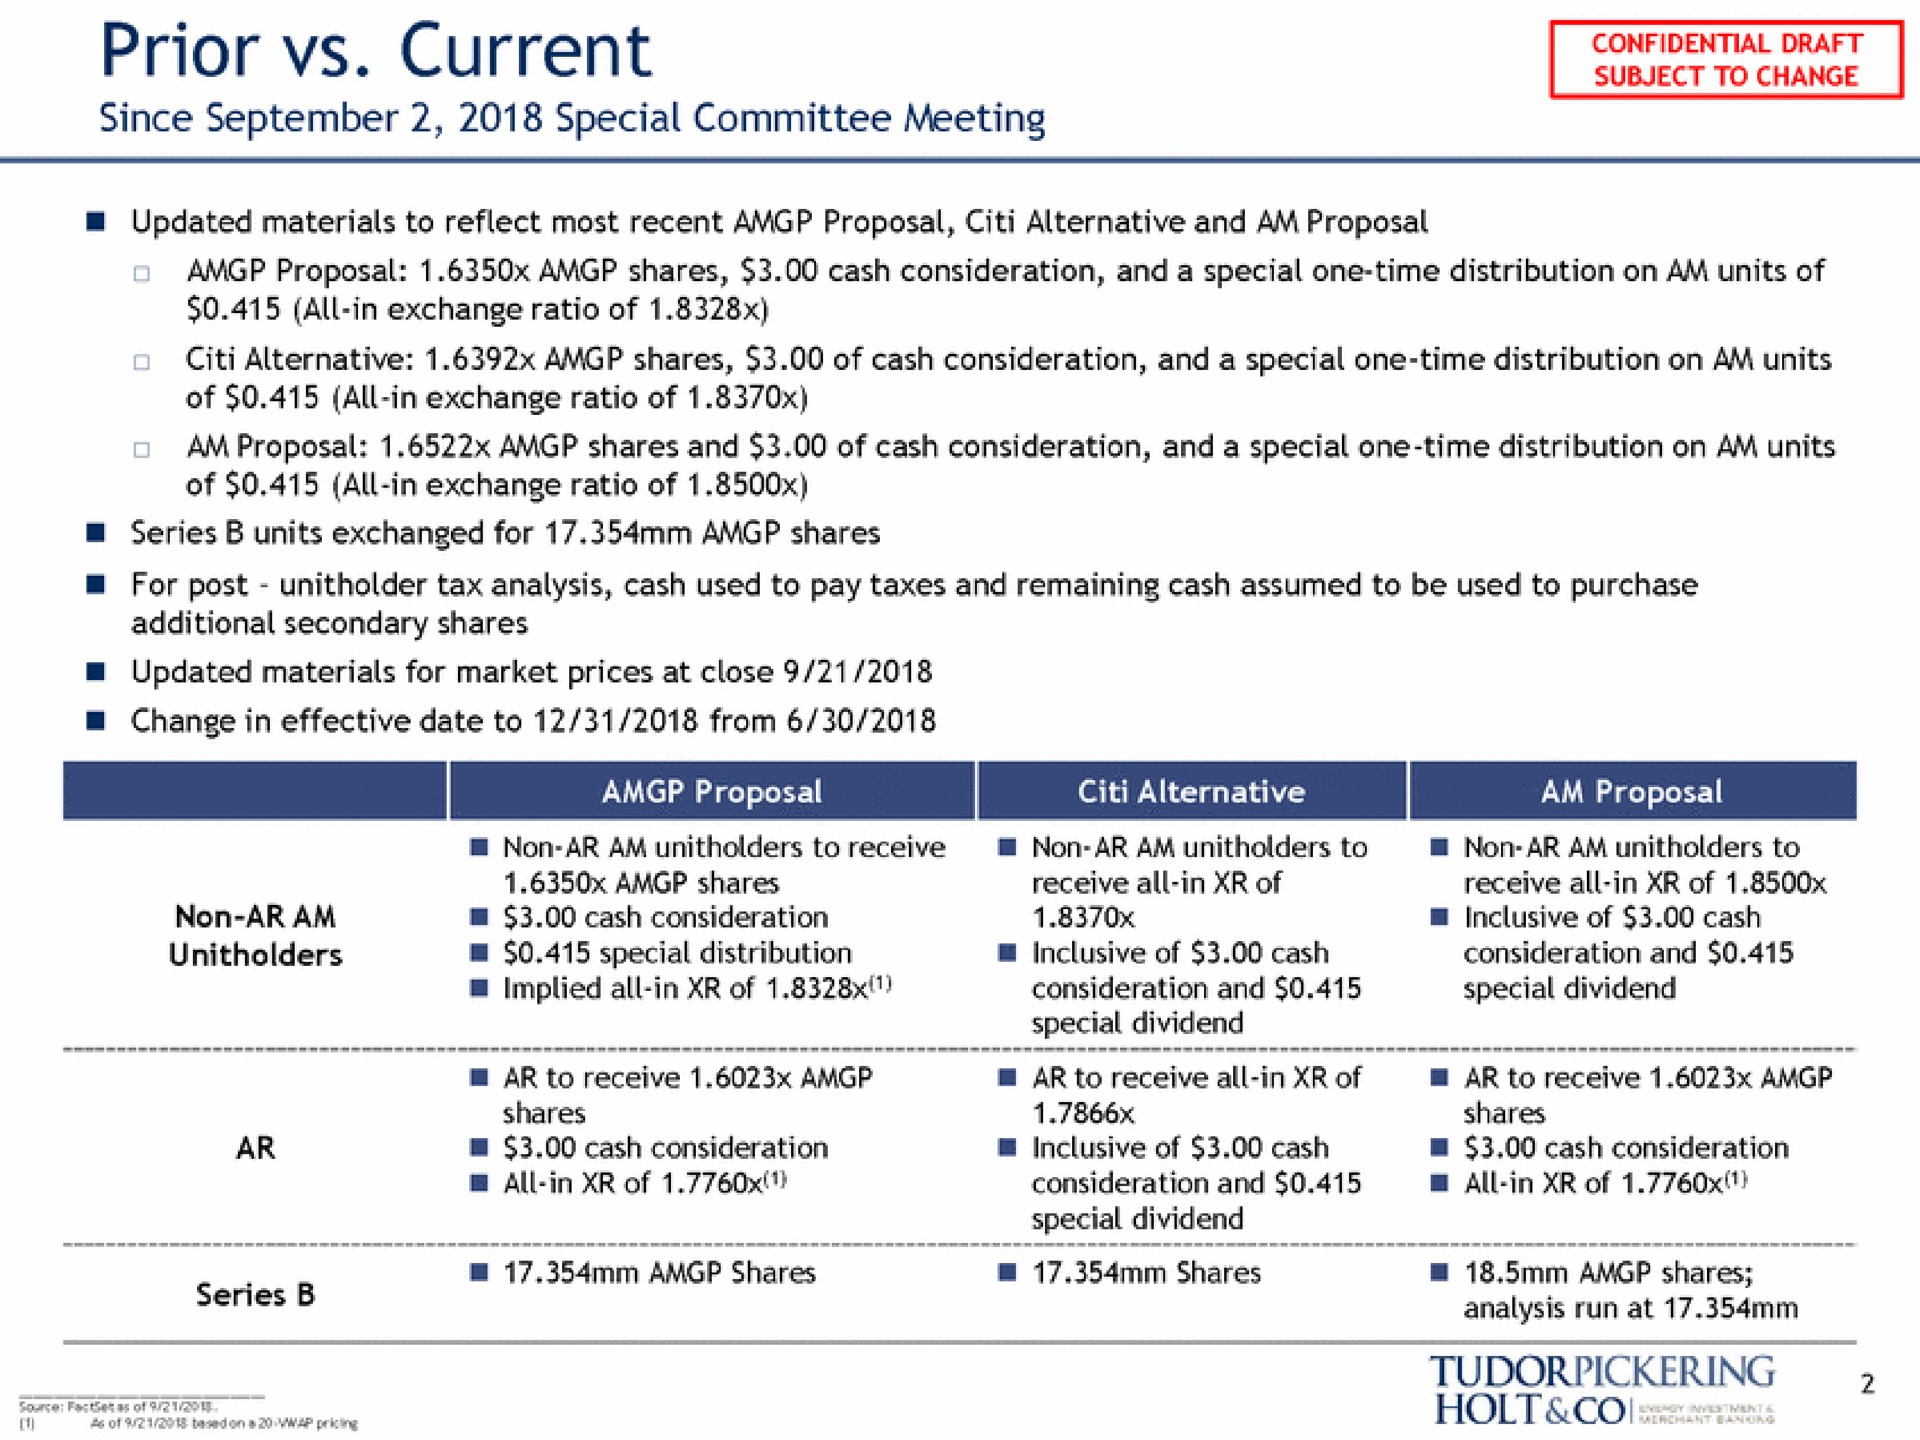 prior current since special committee meeting | Tudor, Pickering, Holt & Co